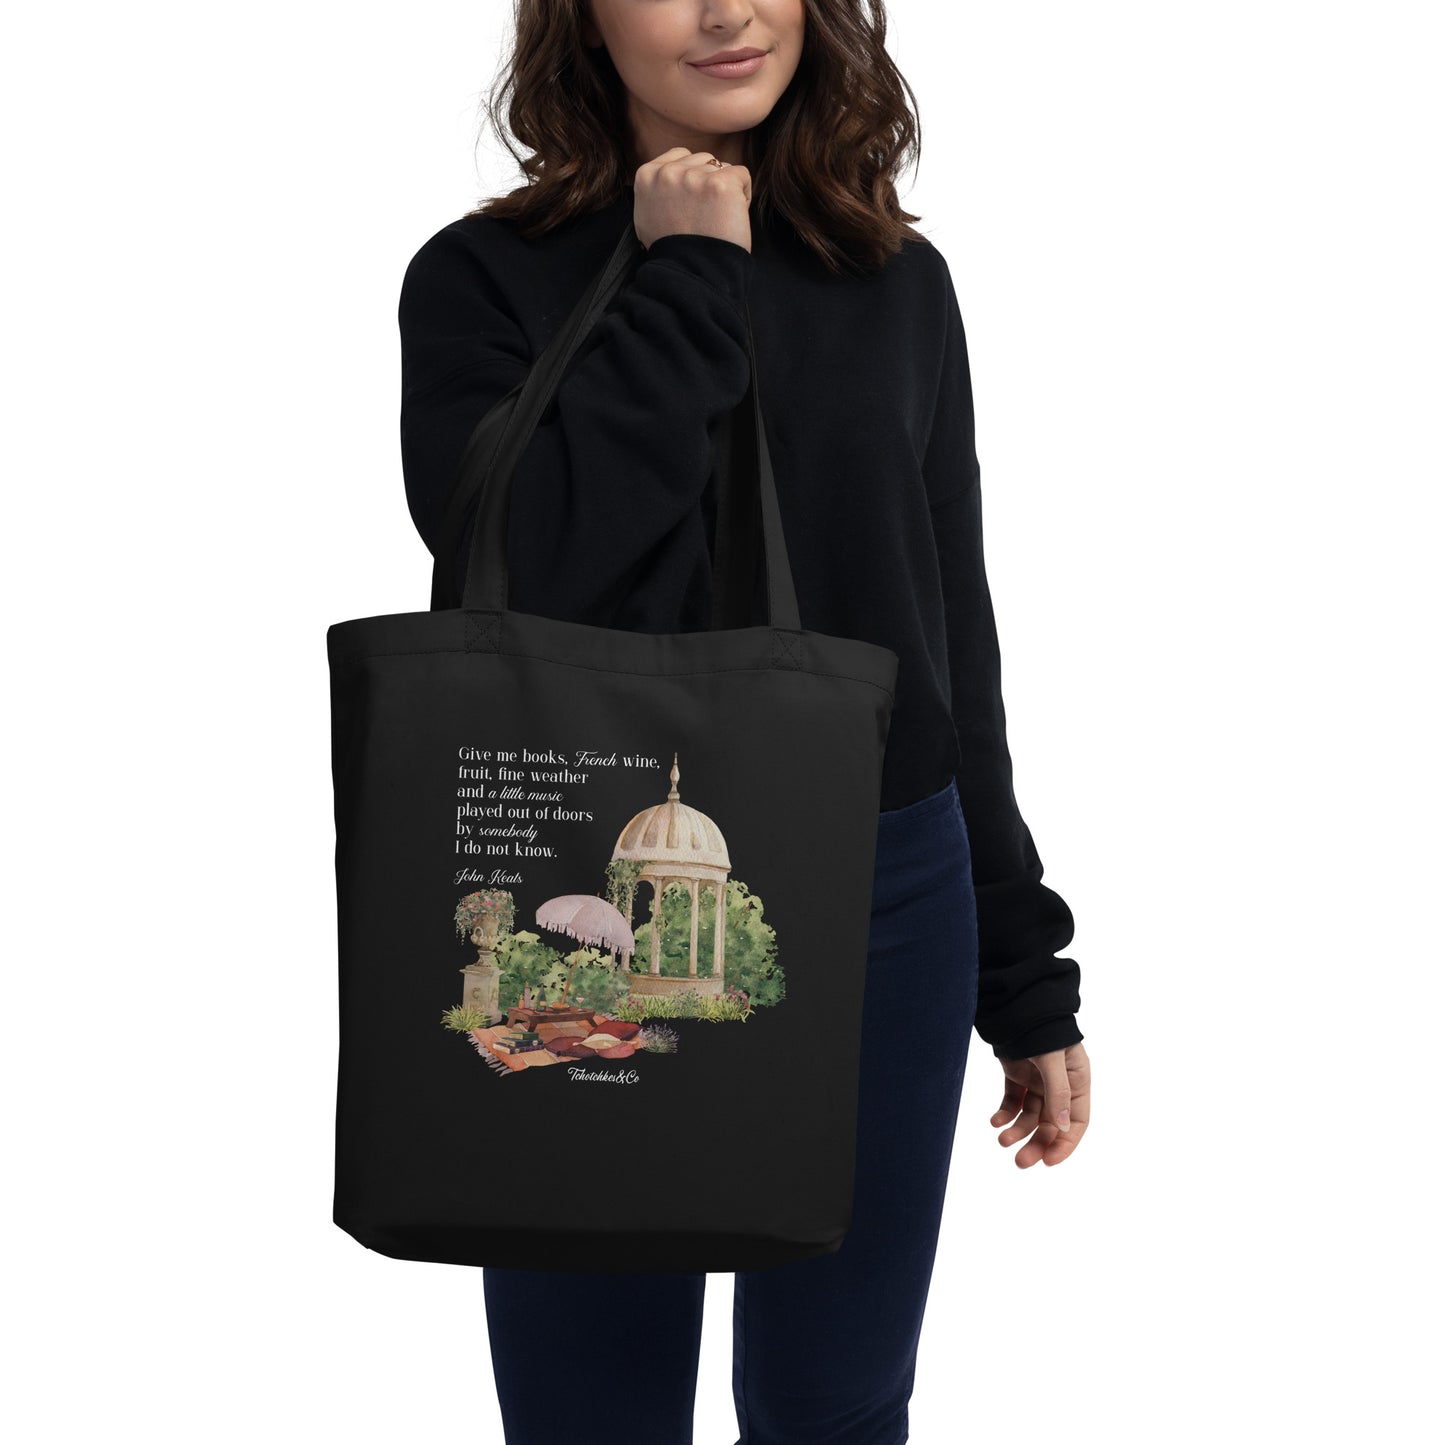 Keats Quote Light and Dark Academia Aesthetic Cotton Tote Bag